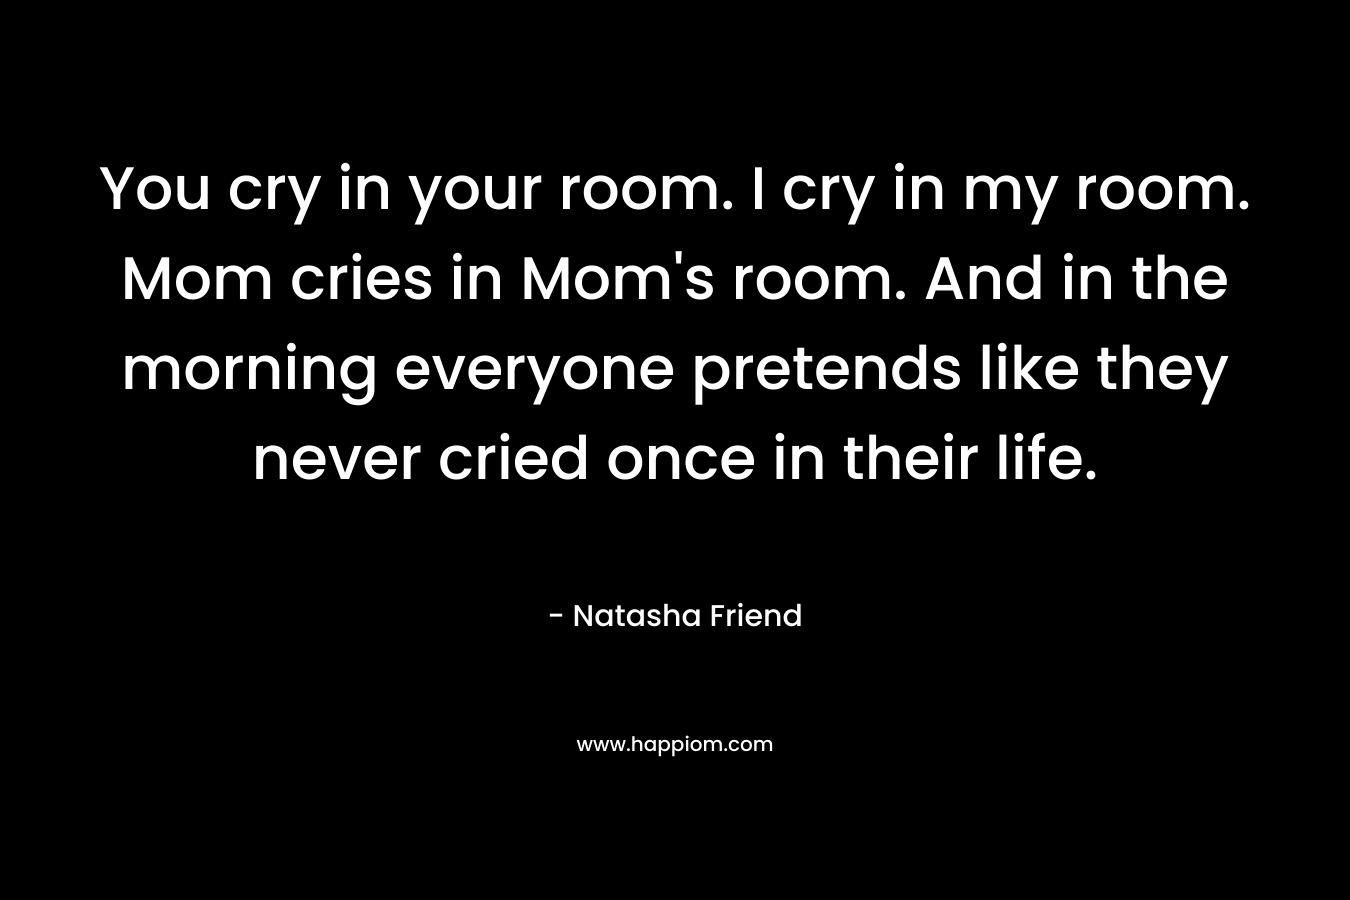 You cry in your room. I cry in my room. Mom cries in Mom's room. And in the morning everyone pretends like they never cried once in their life.